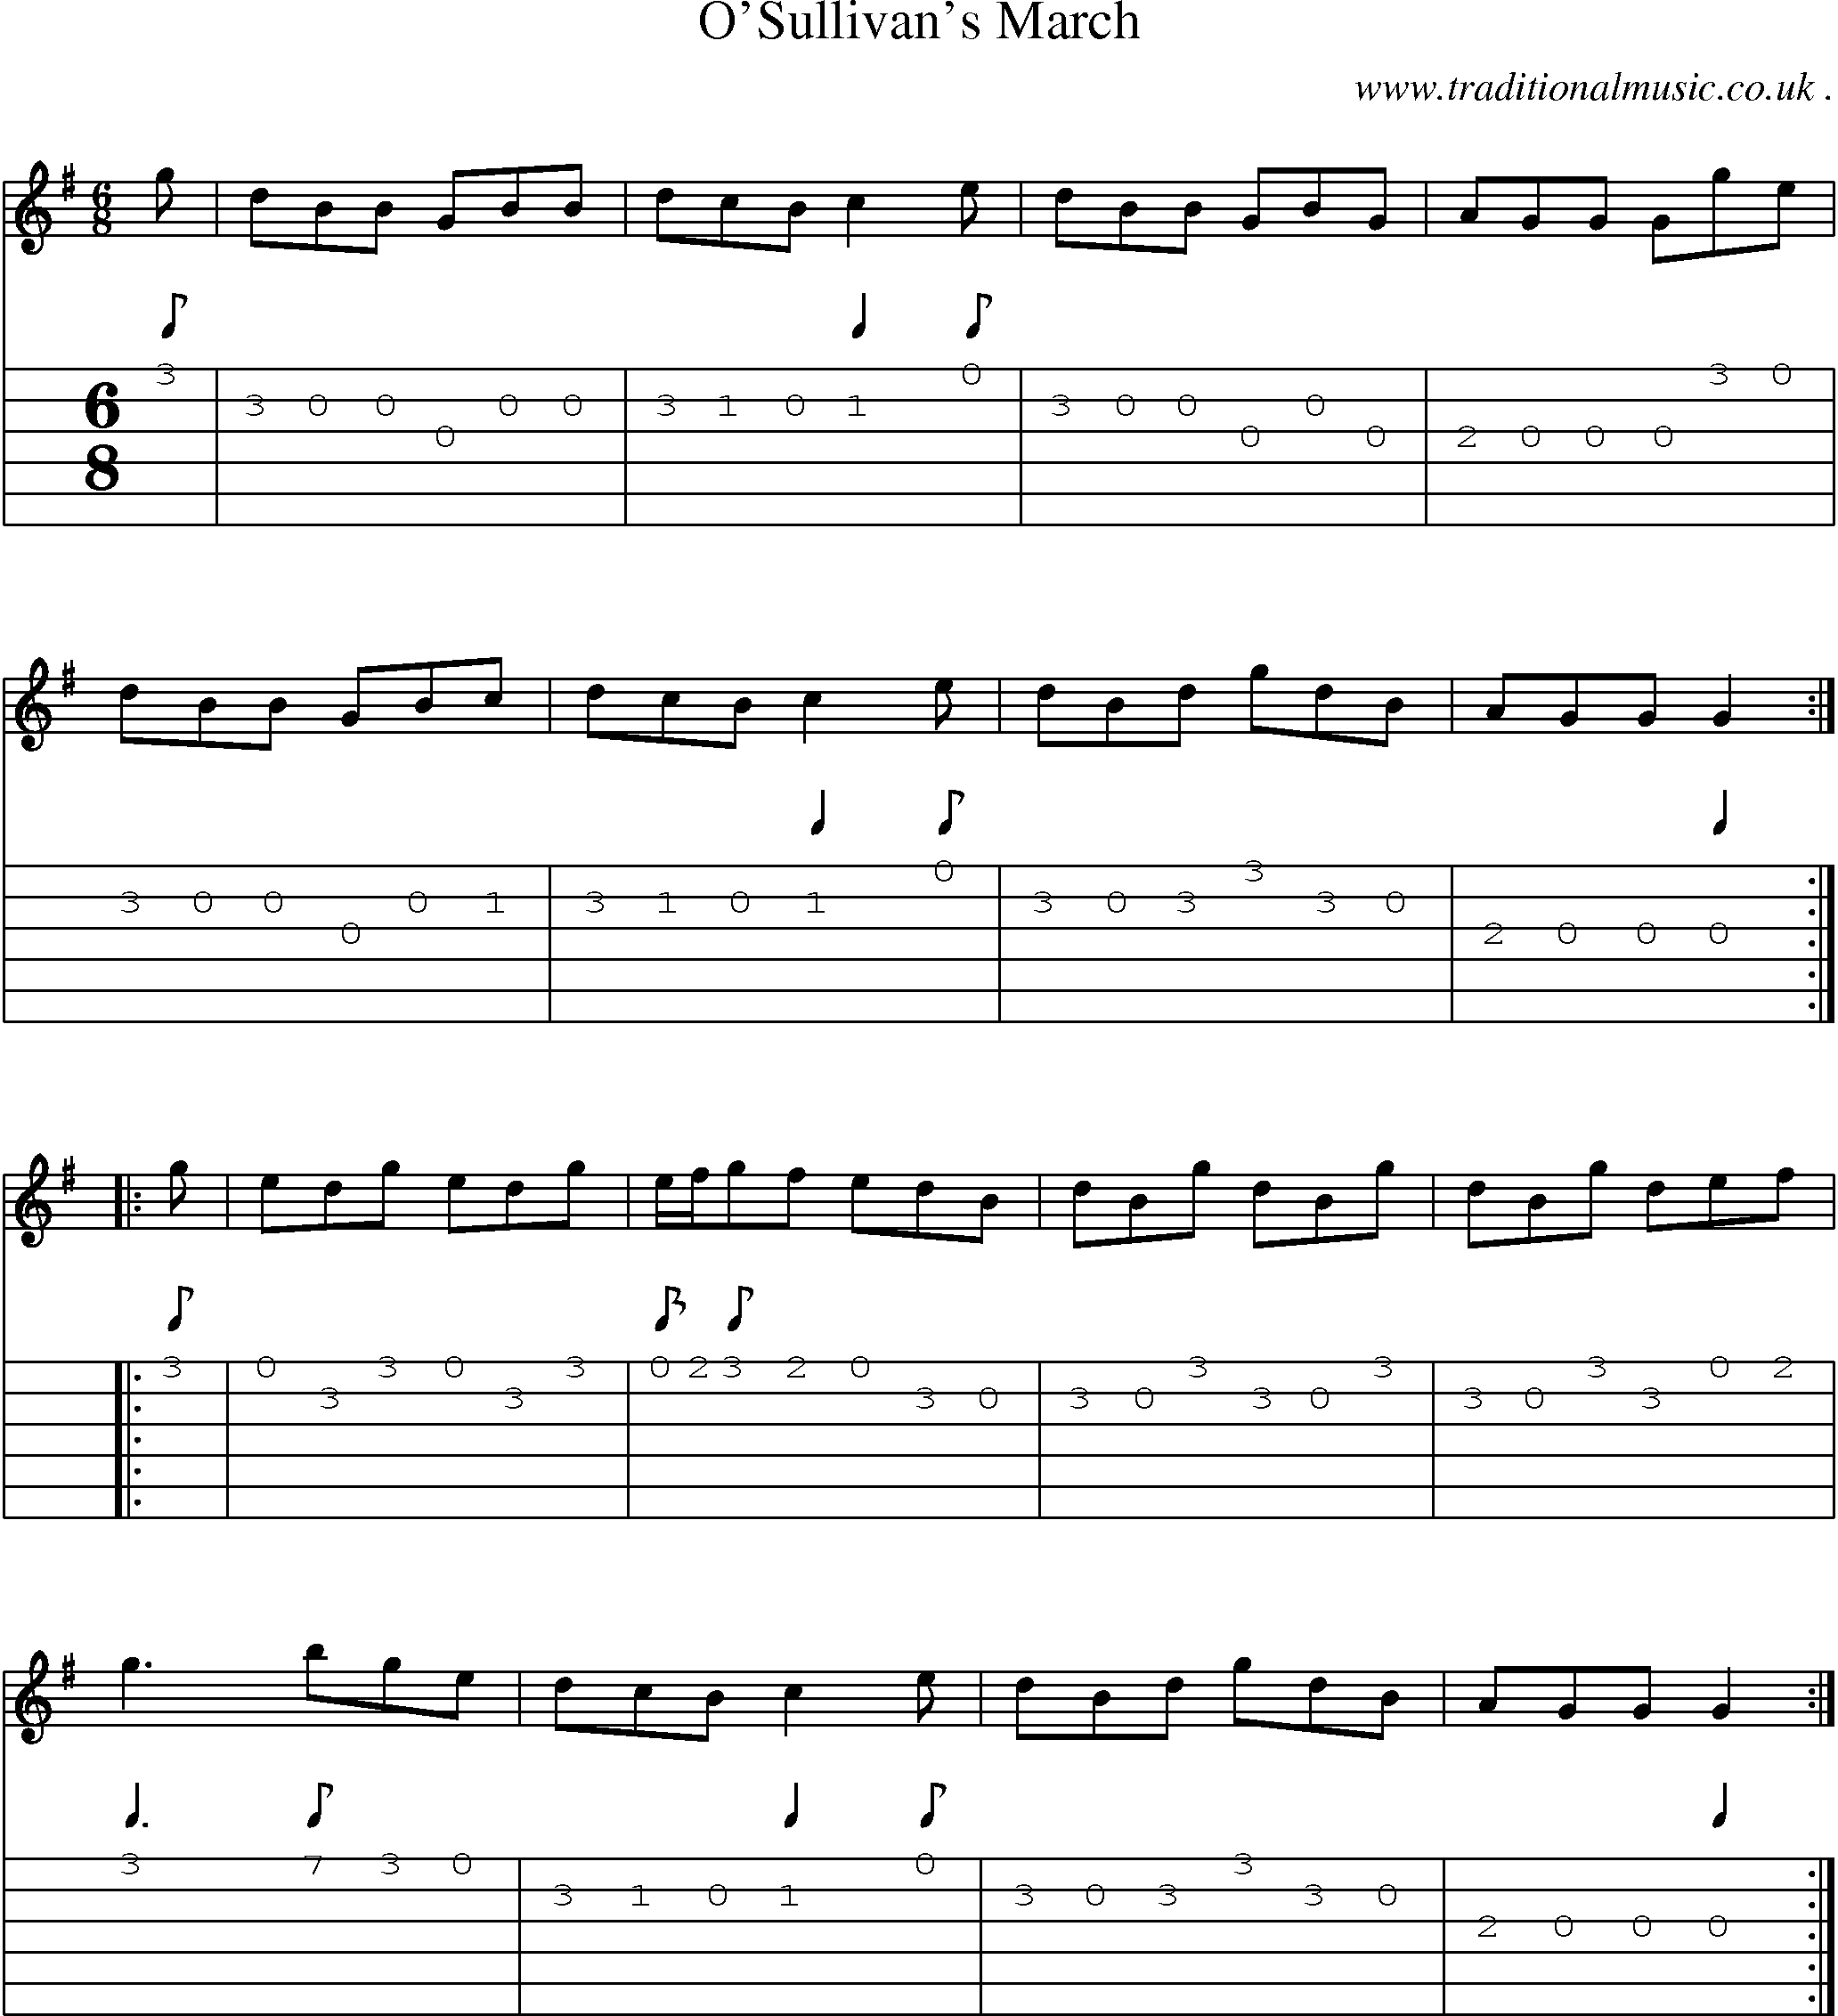 Sheet-music  score, Chords and Guitar Tabs for Osullivans March